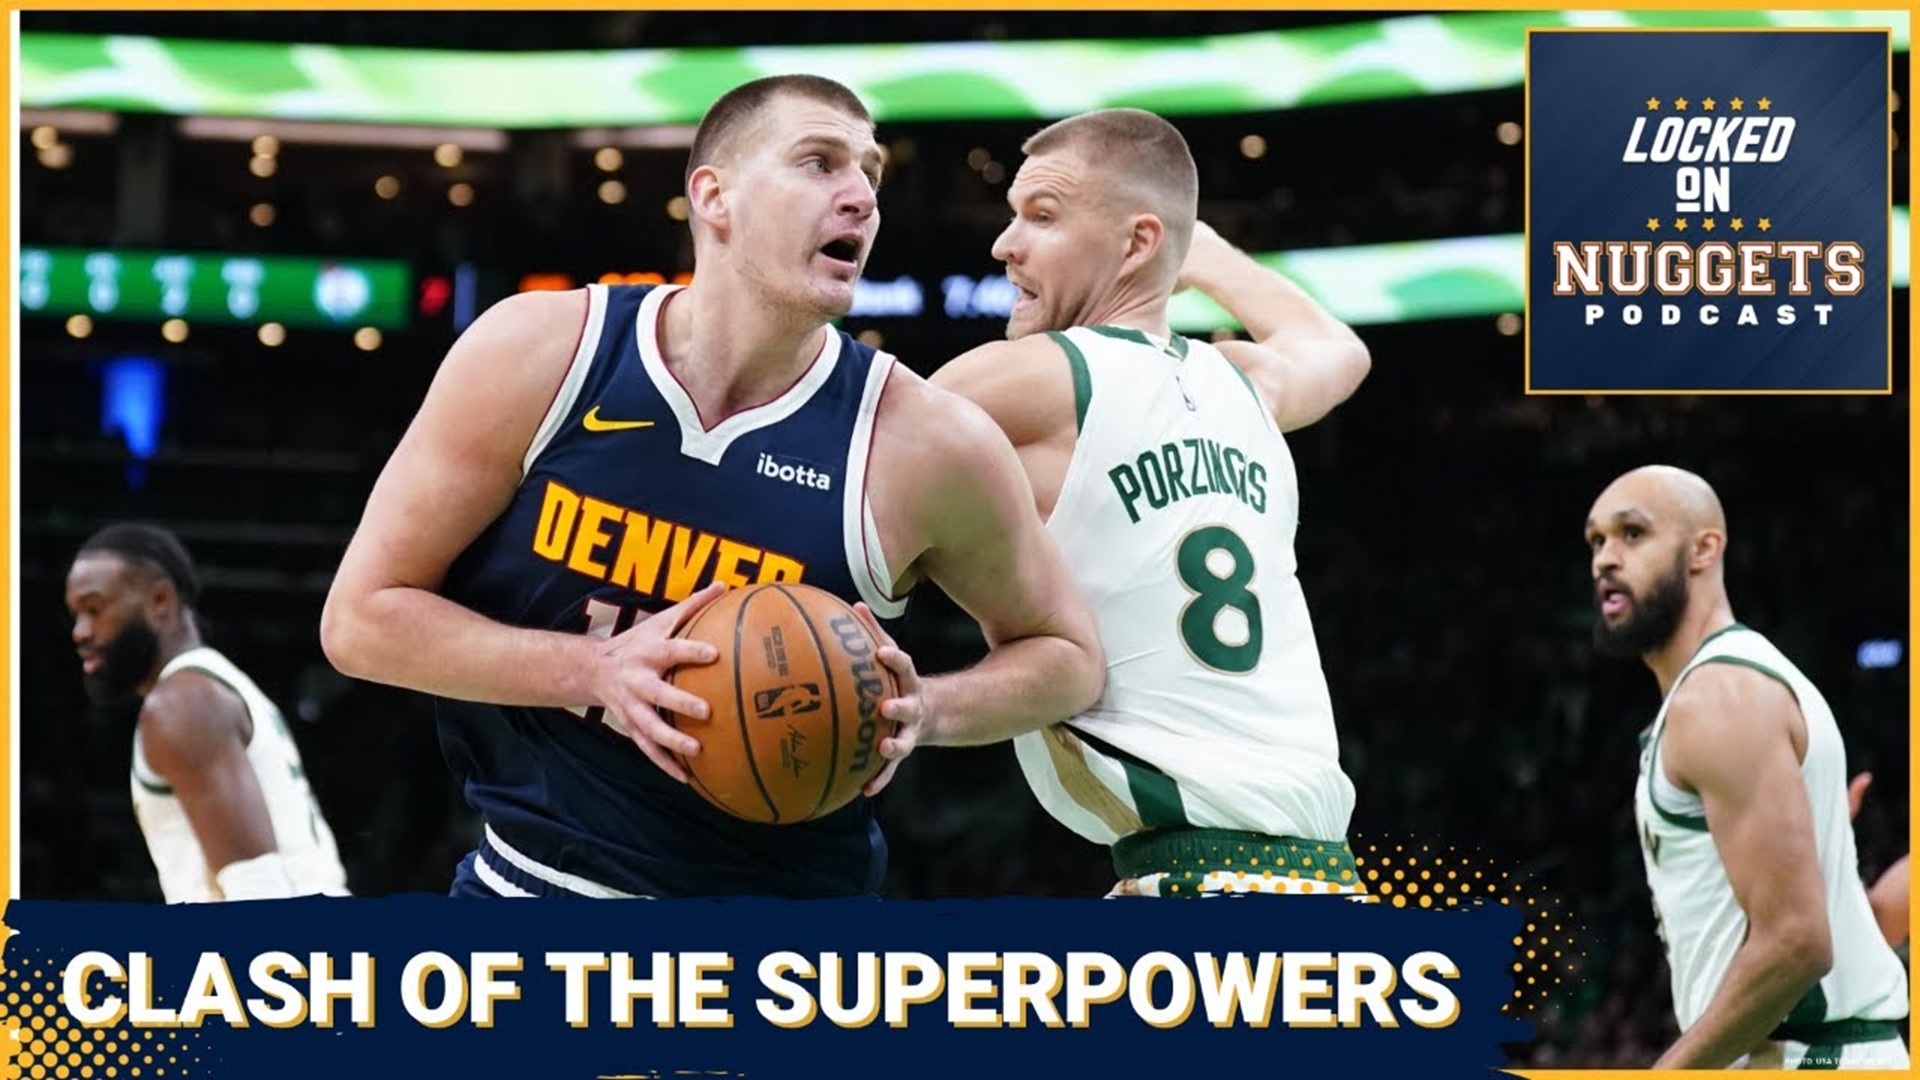 The Denver Nuggets take on the Boston Celtics after losing their first overtime game of the season to the Phoenix Suns. How can the Nuggets bound back?